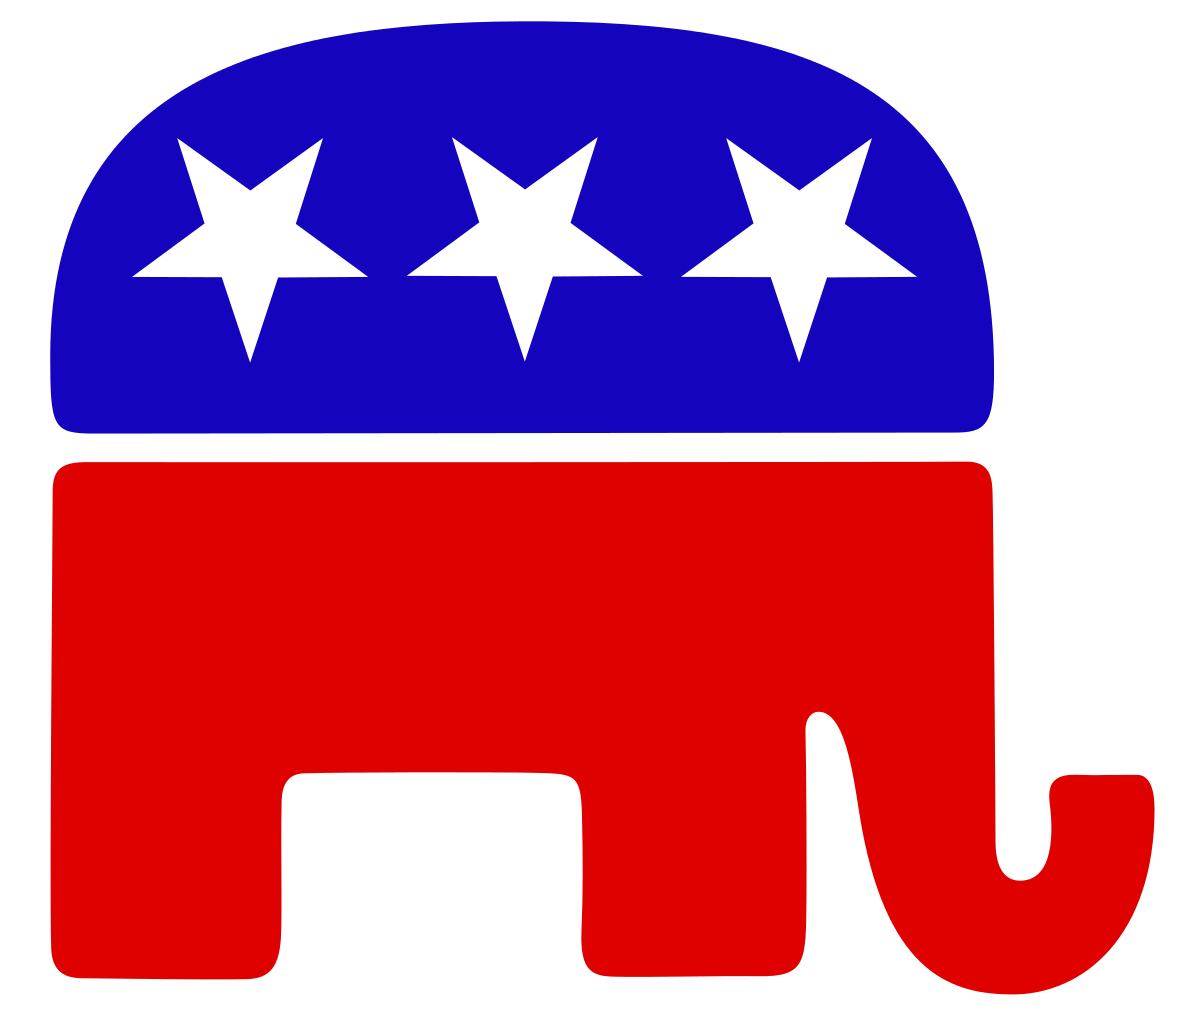 Election of 2014 defined by Republican gains